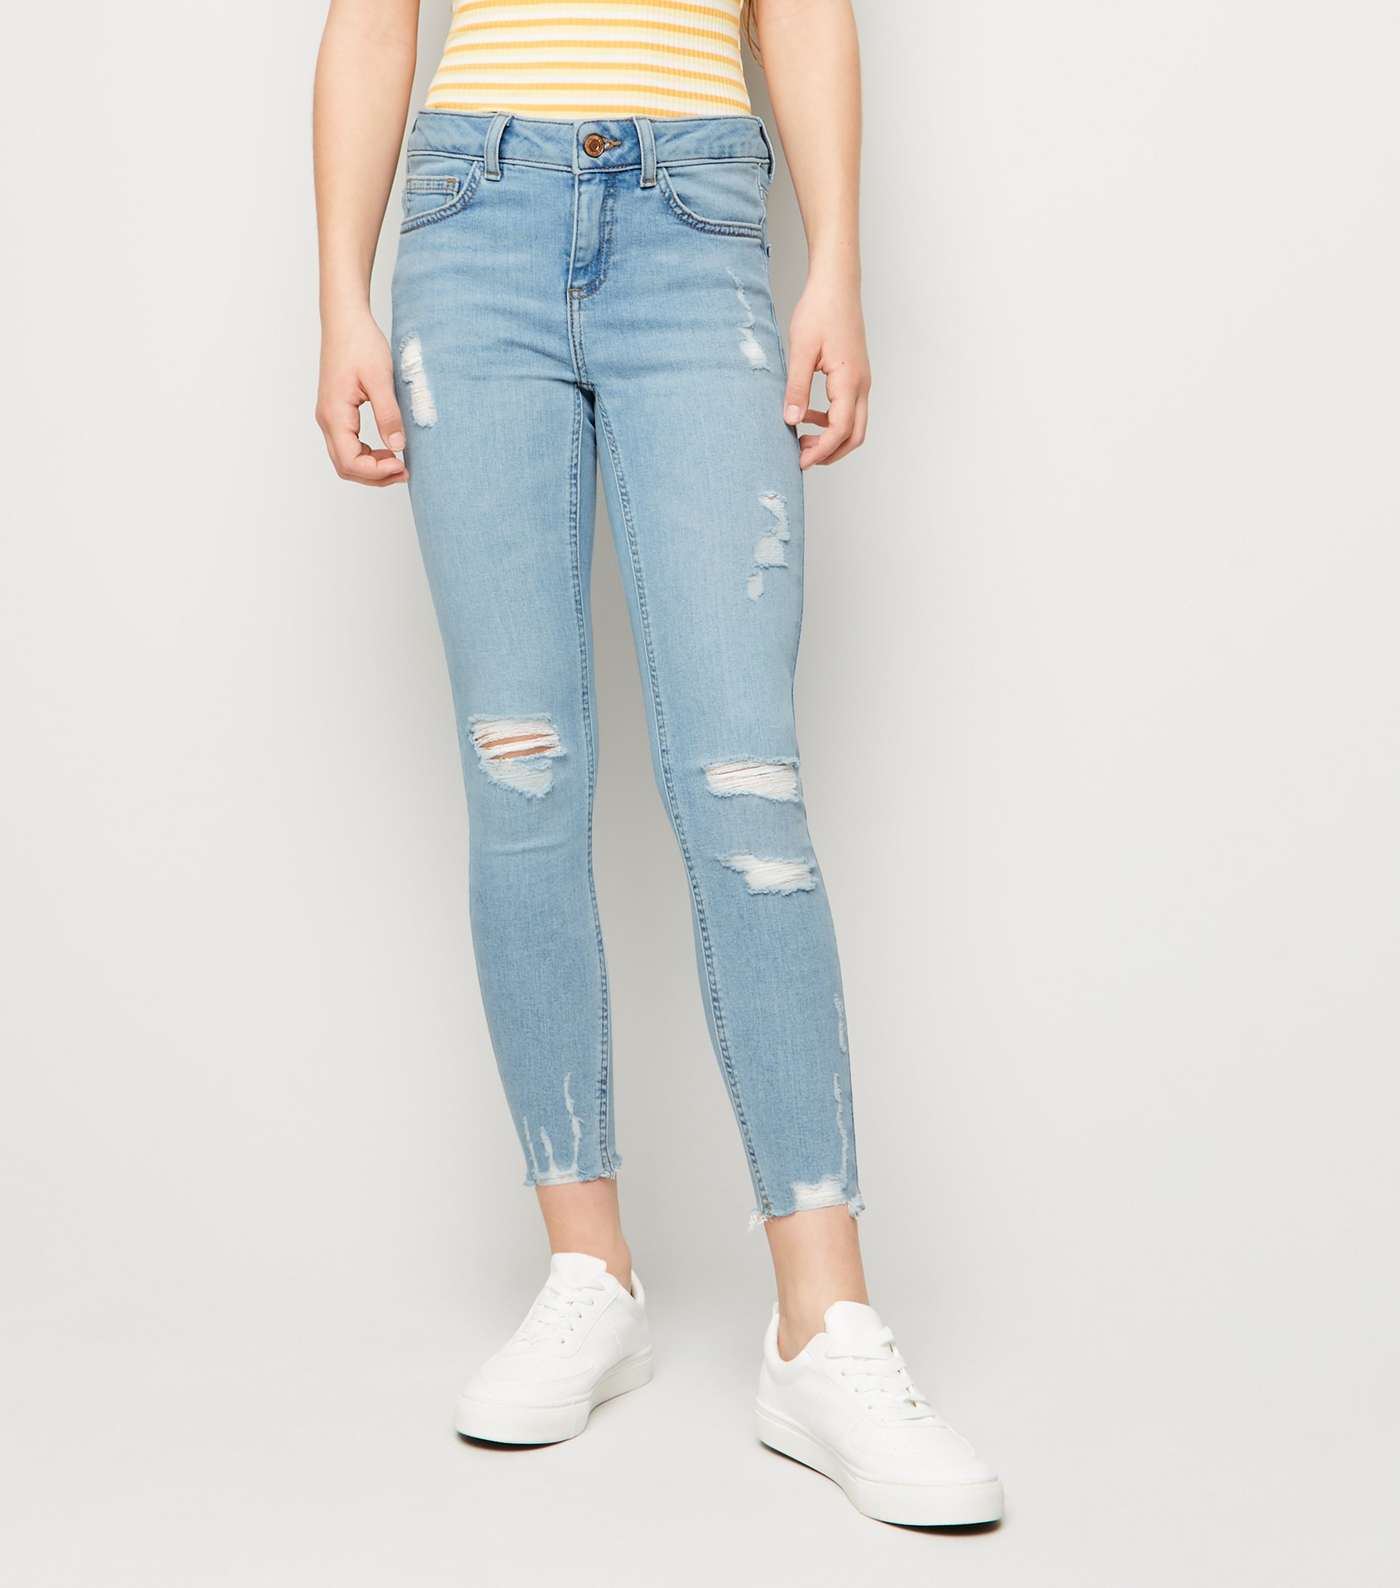 Girls Pale Blue Ripped Skinny Jeans Image 2